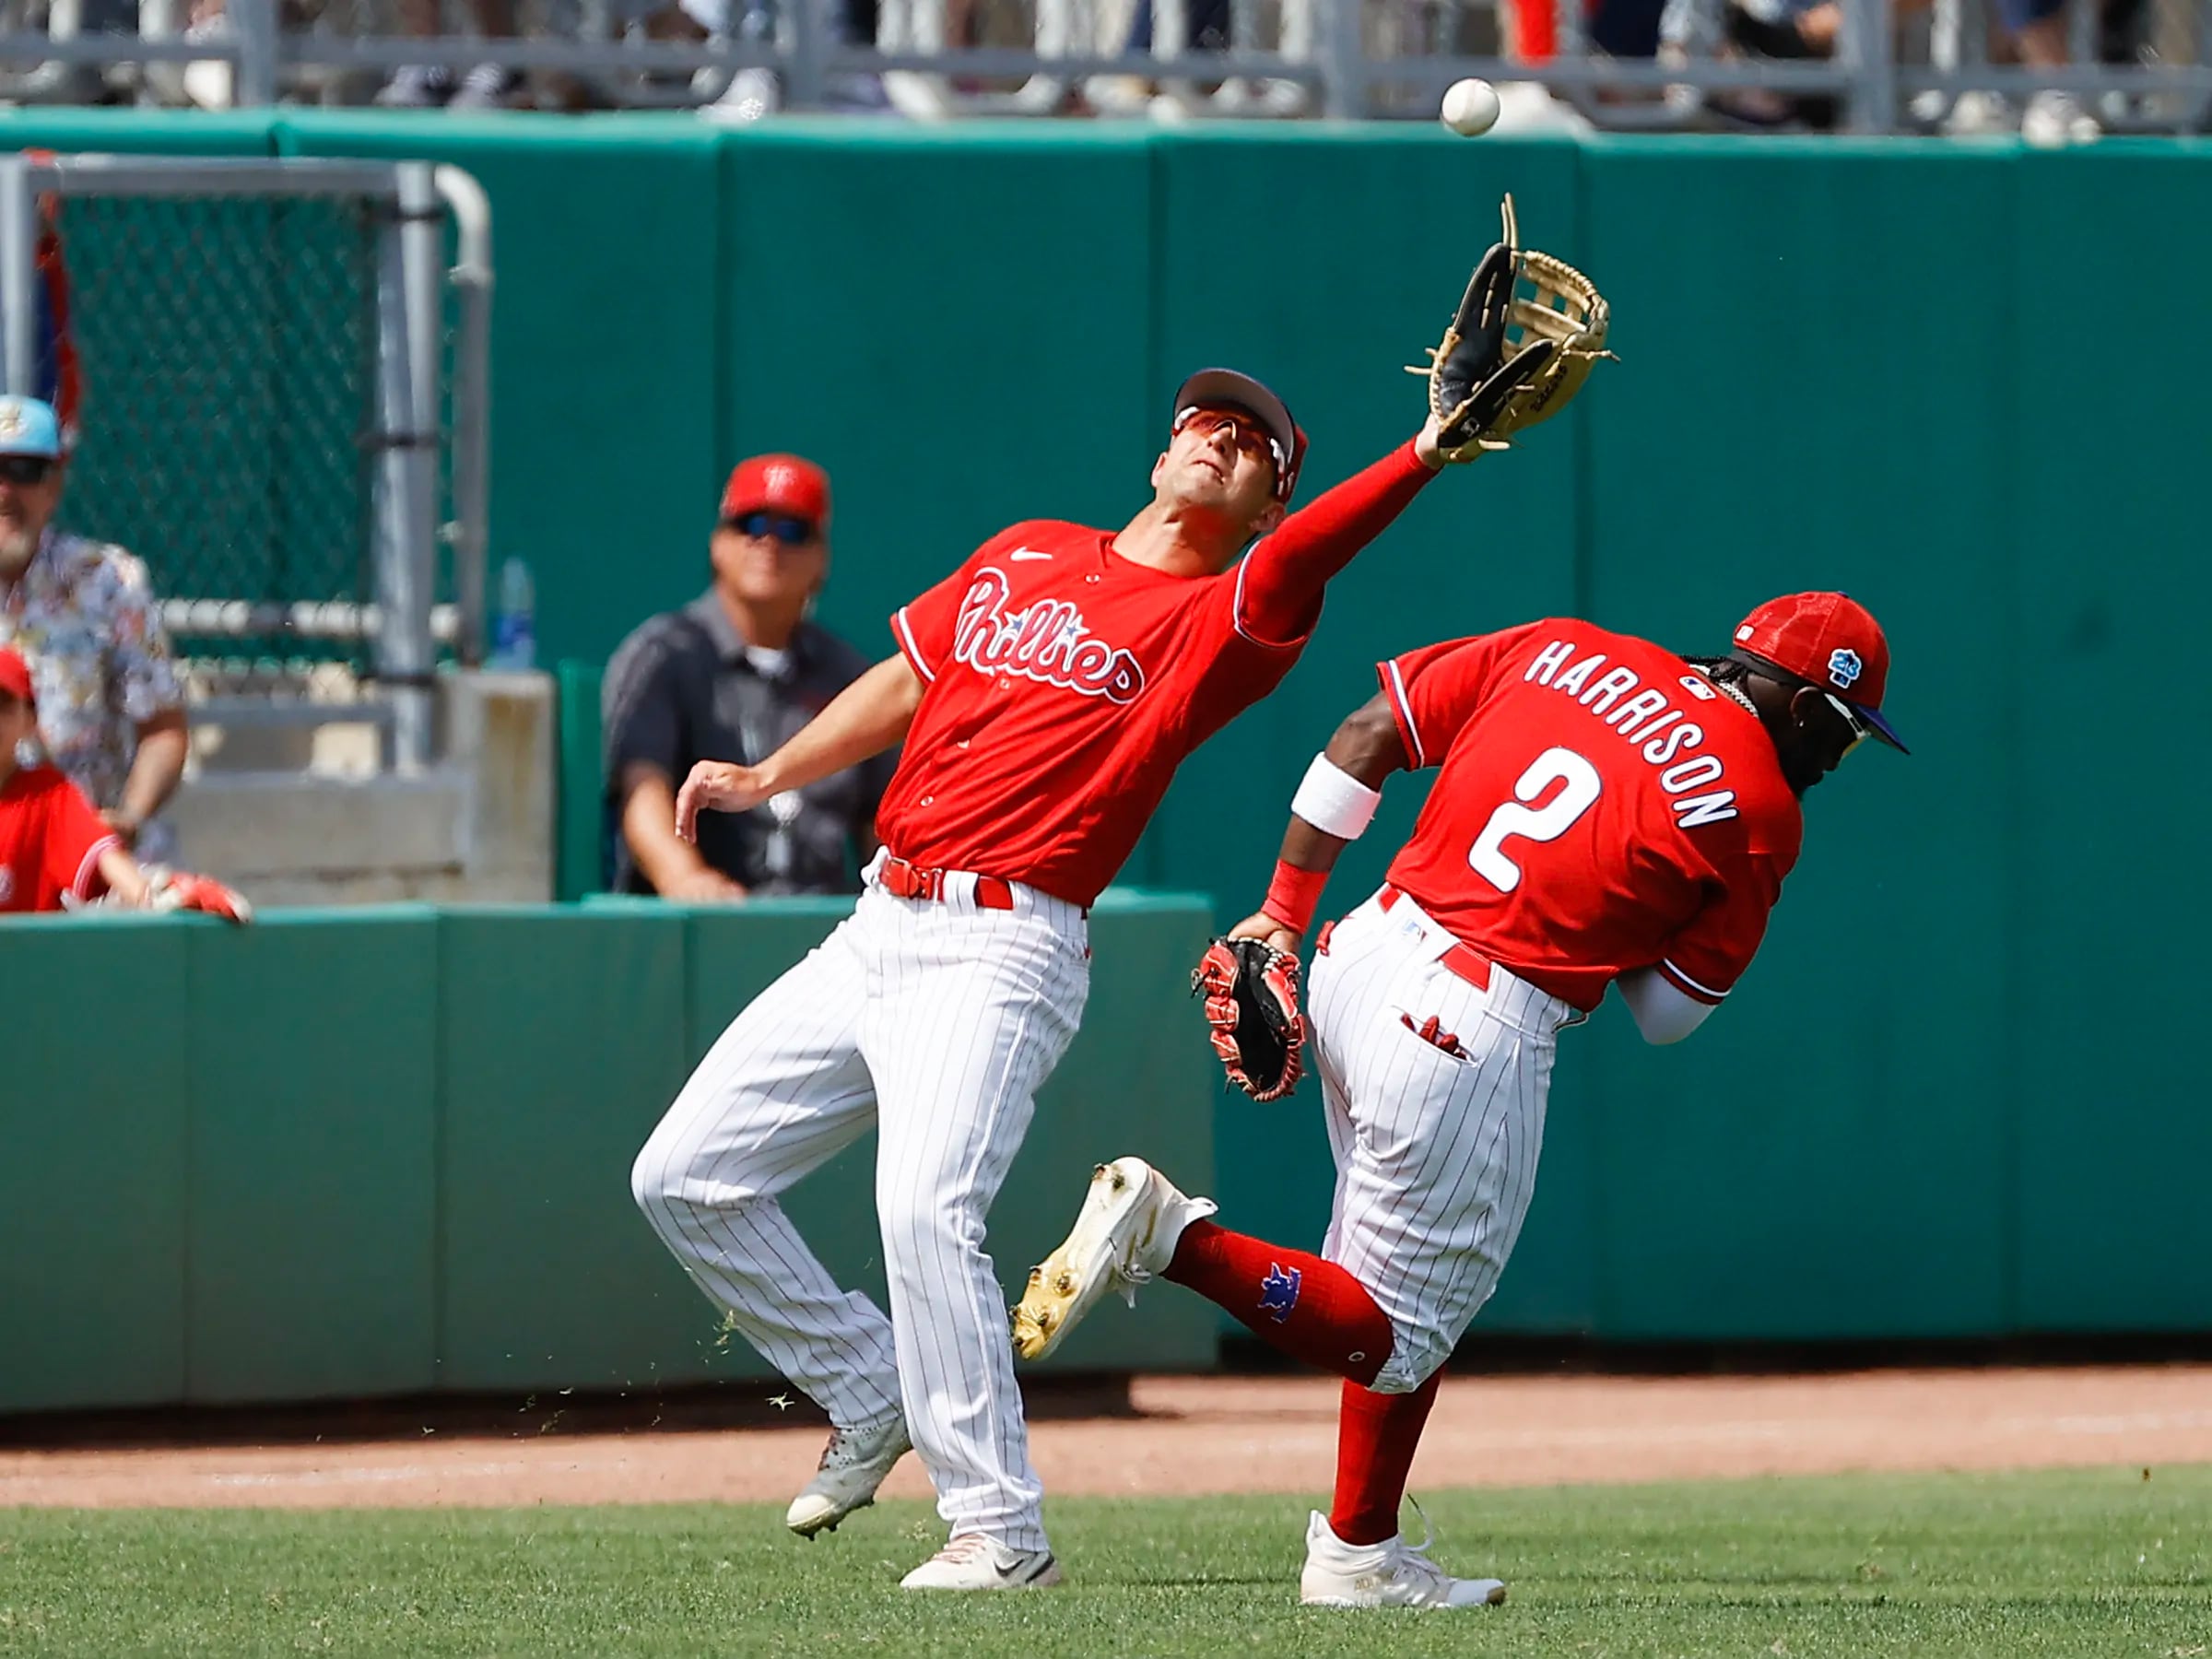 Photos from the Phillies spring training win over the Pirates